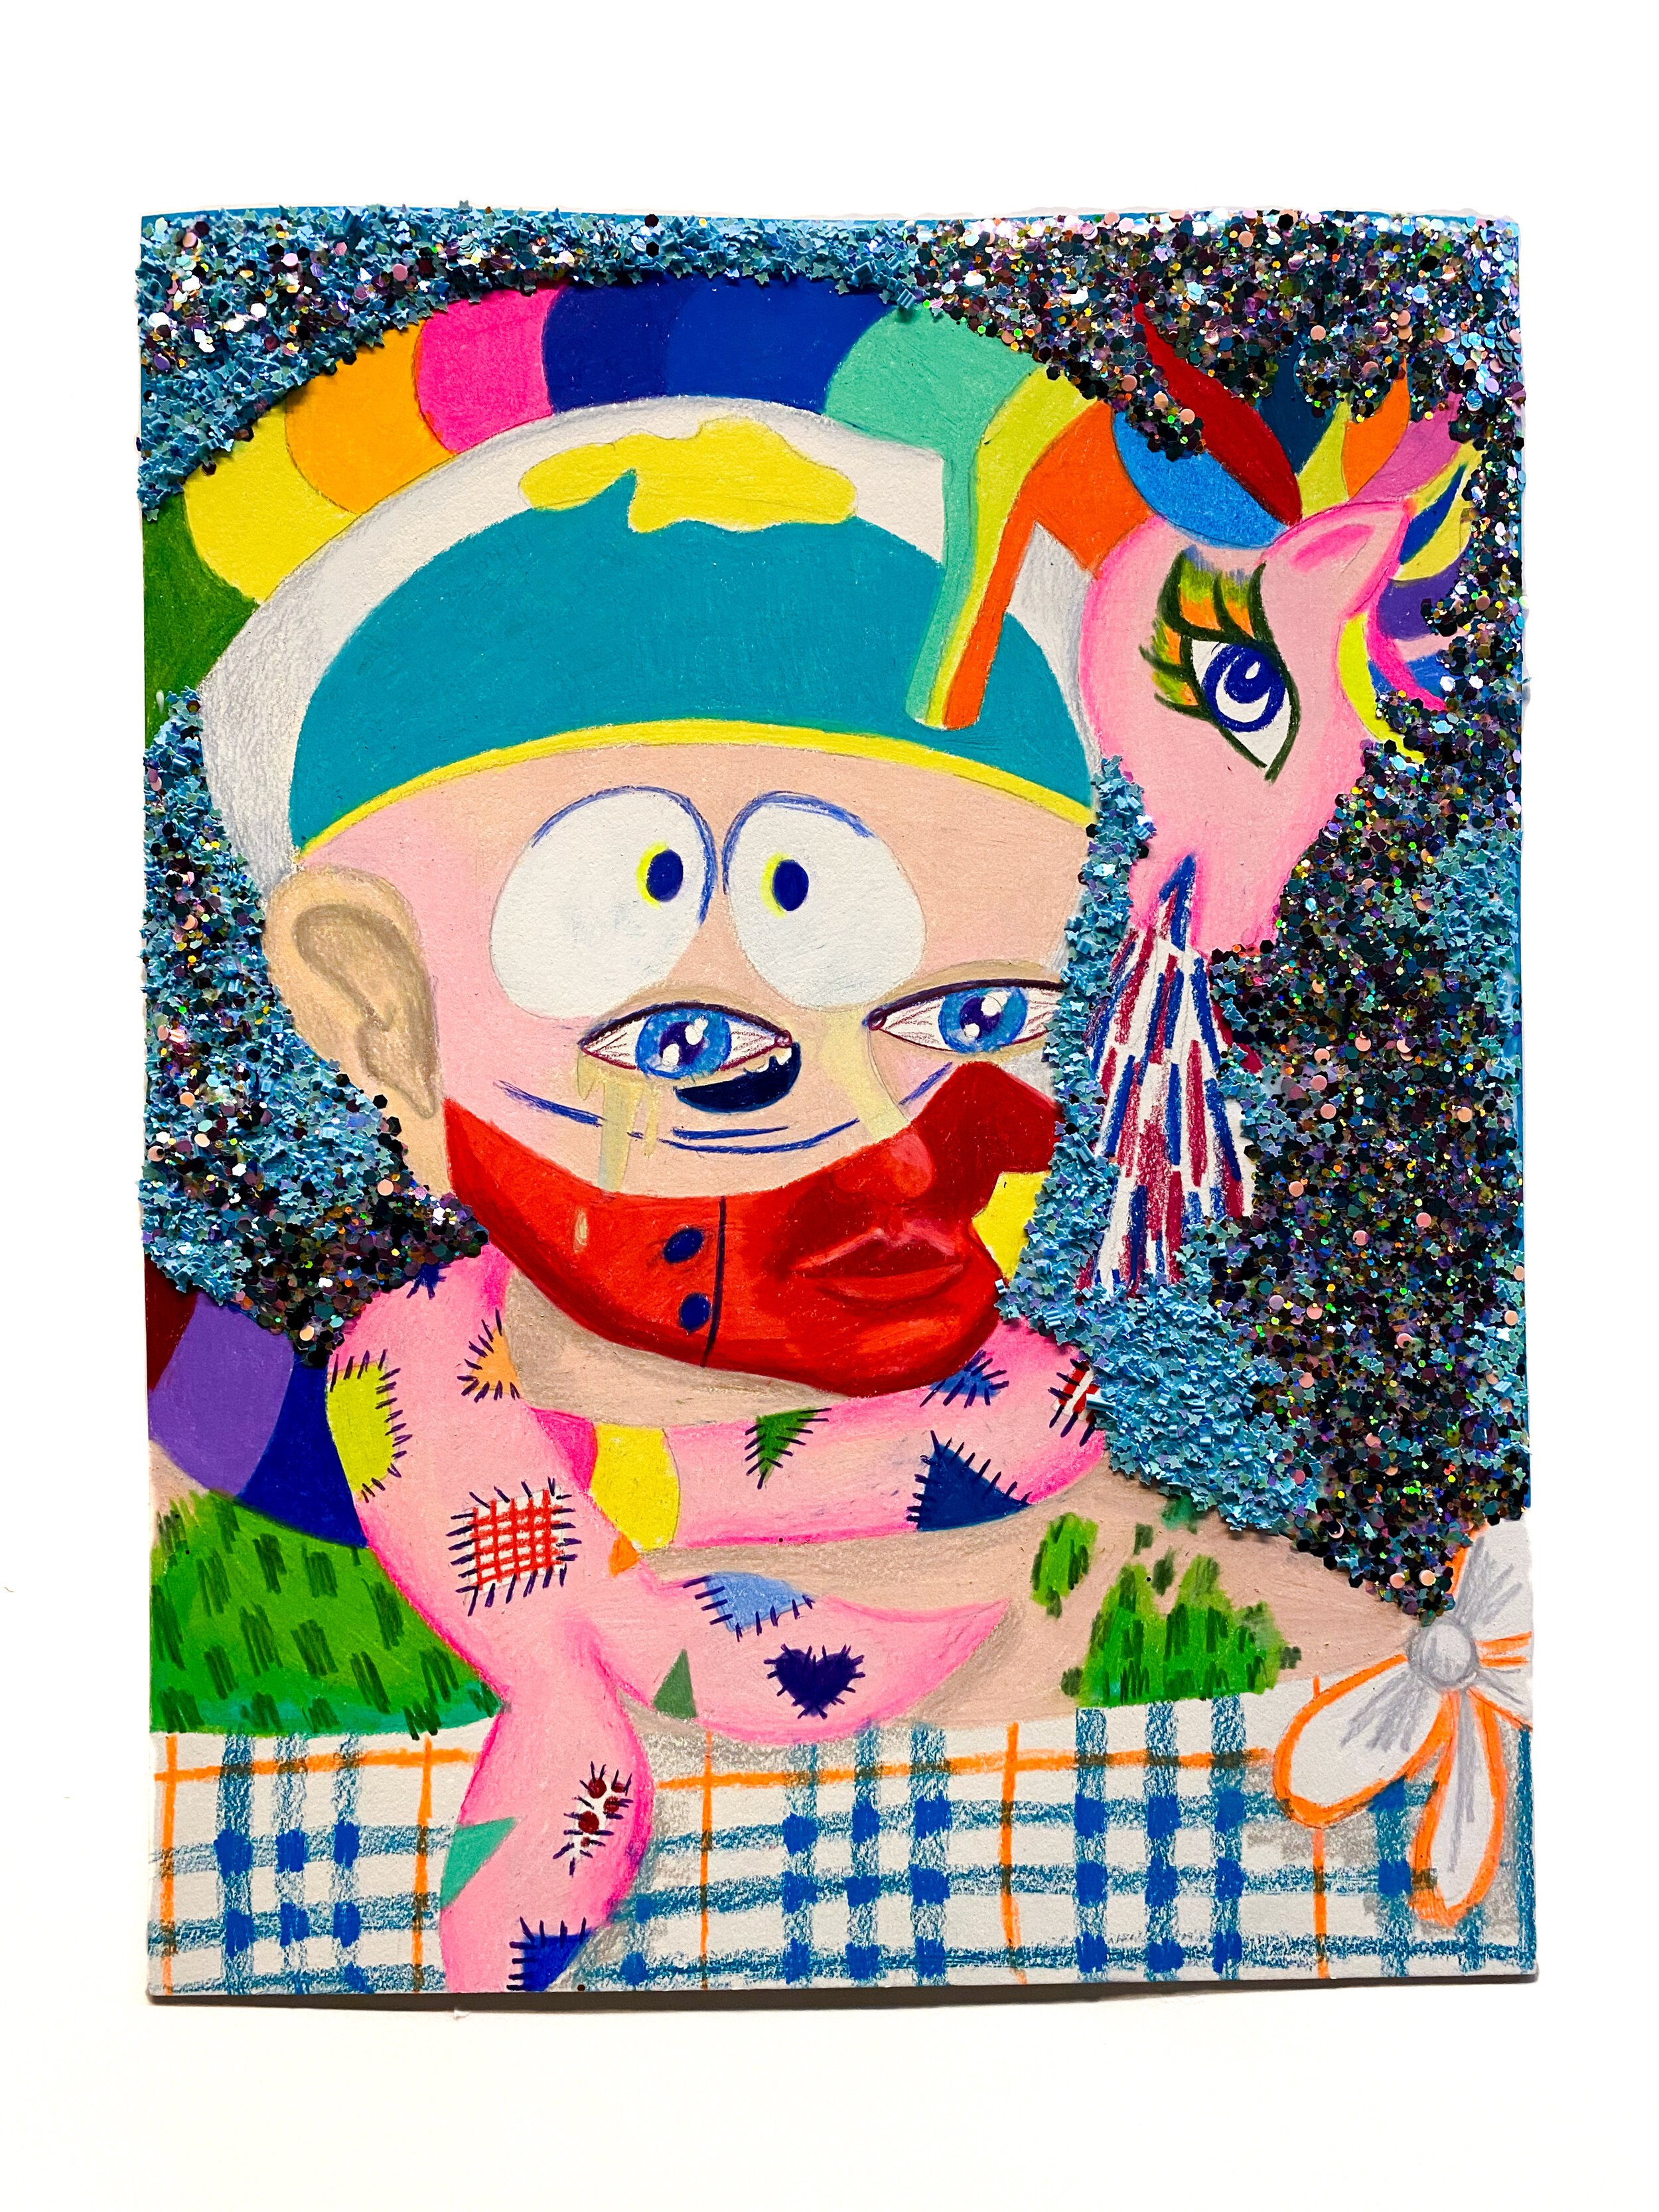   Baby with Eric Cartman Face Paint and Ashamed Girls Pony Dolphin,  2021  14 x 11 inches (38.1 x 27.94 cm.)  Colored pencil, acrylic paint, Elmer's glue, Modge Podge, and glitter on paper 